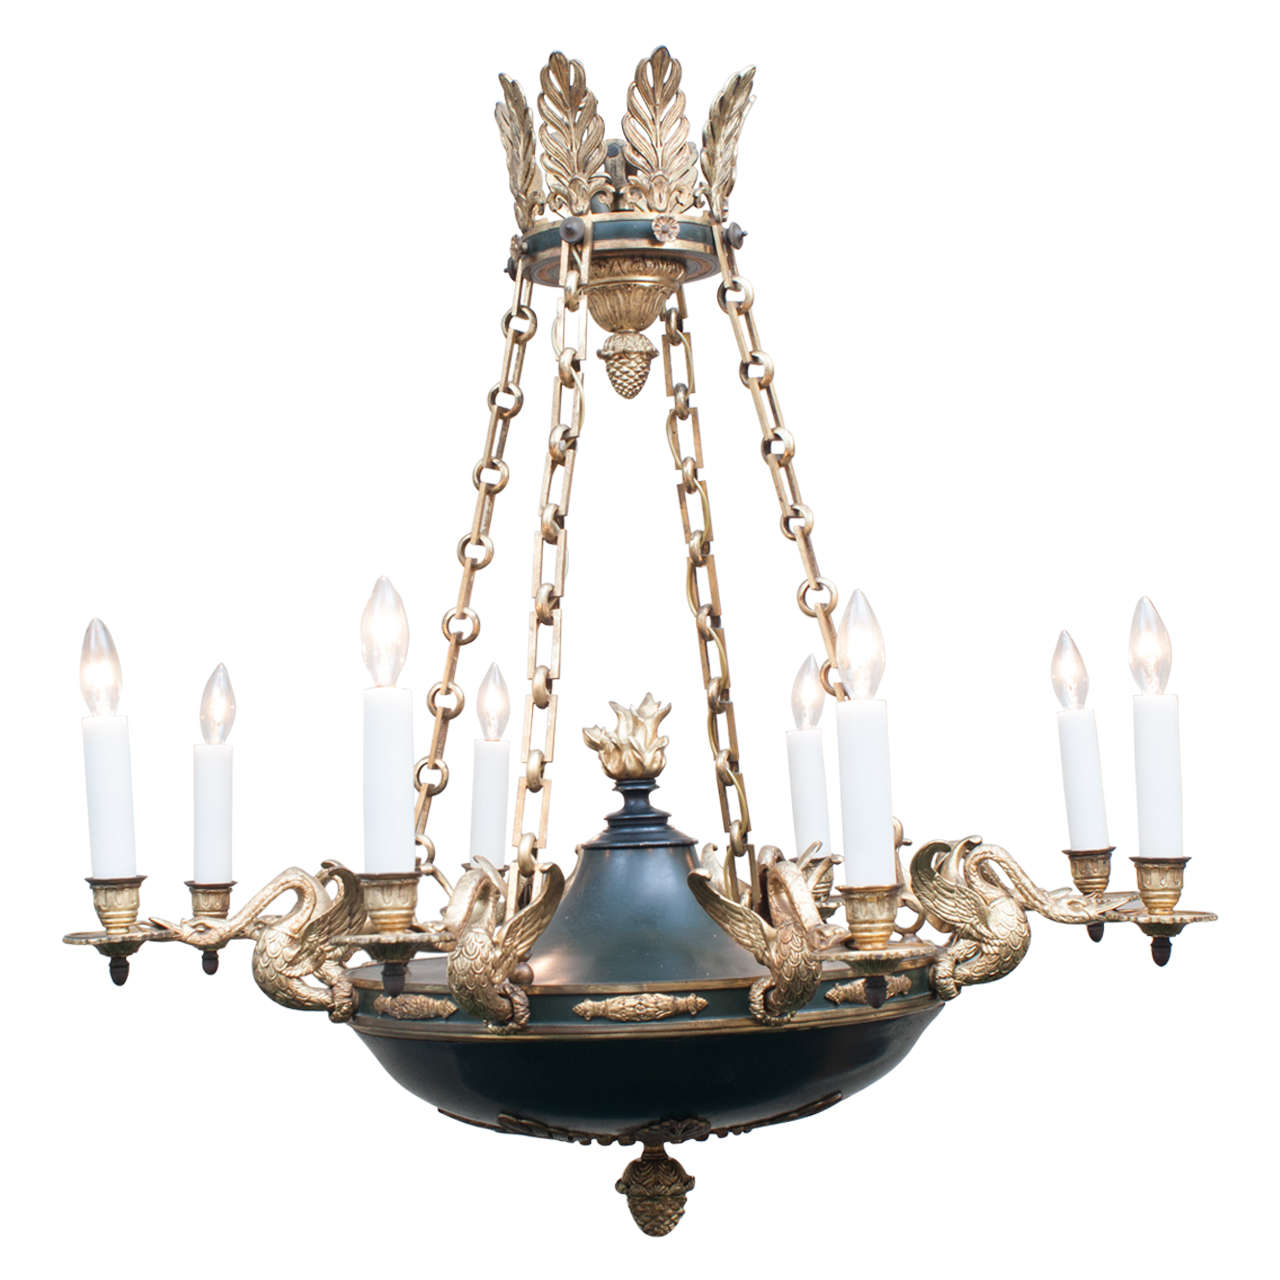 Empire Style Eight-Light Gilt Brass and Tole Chandelier, France, circa 1890